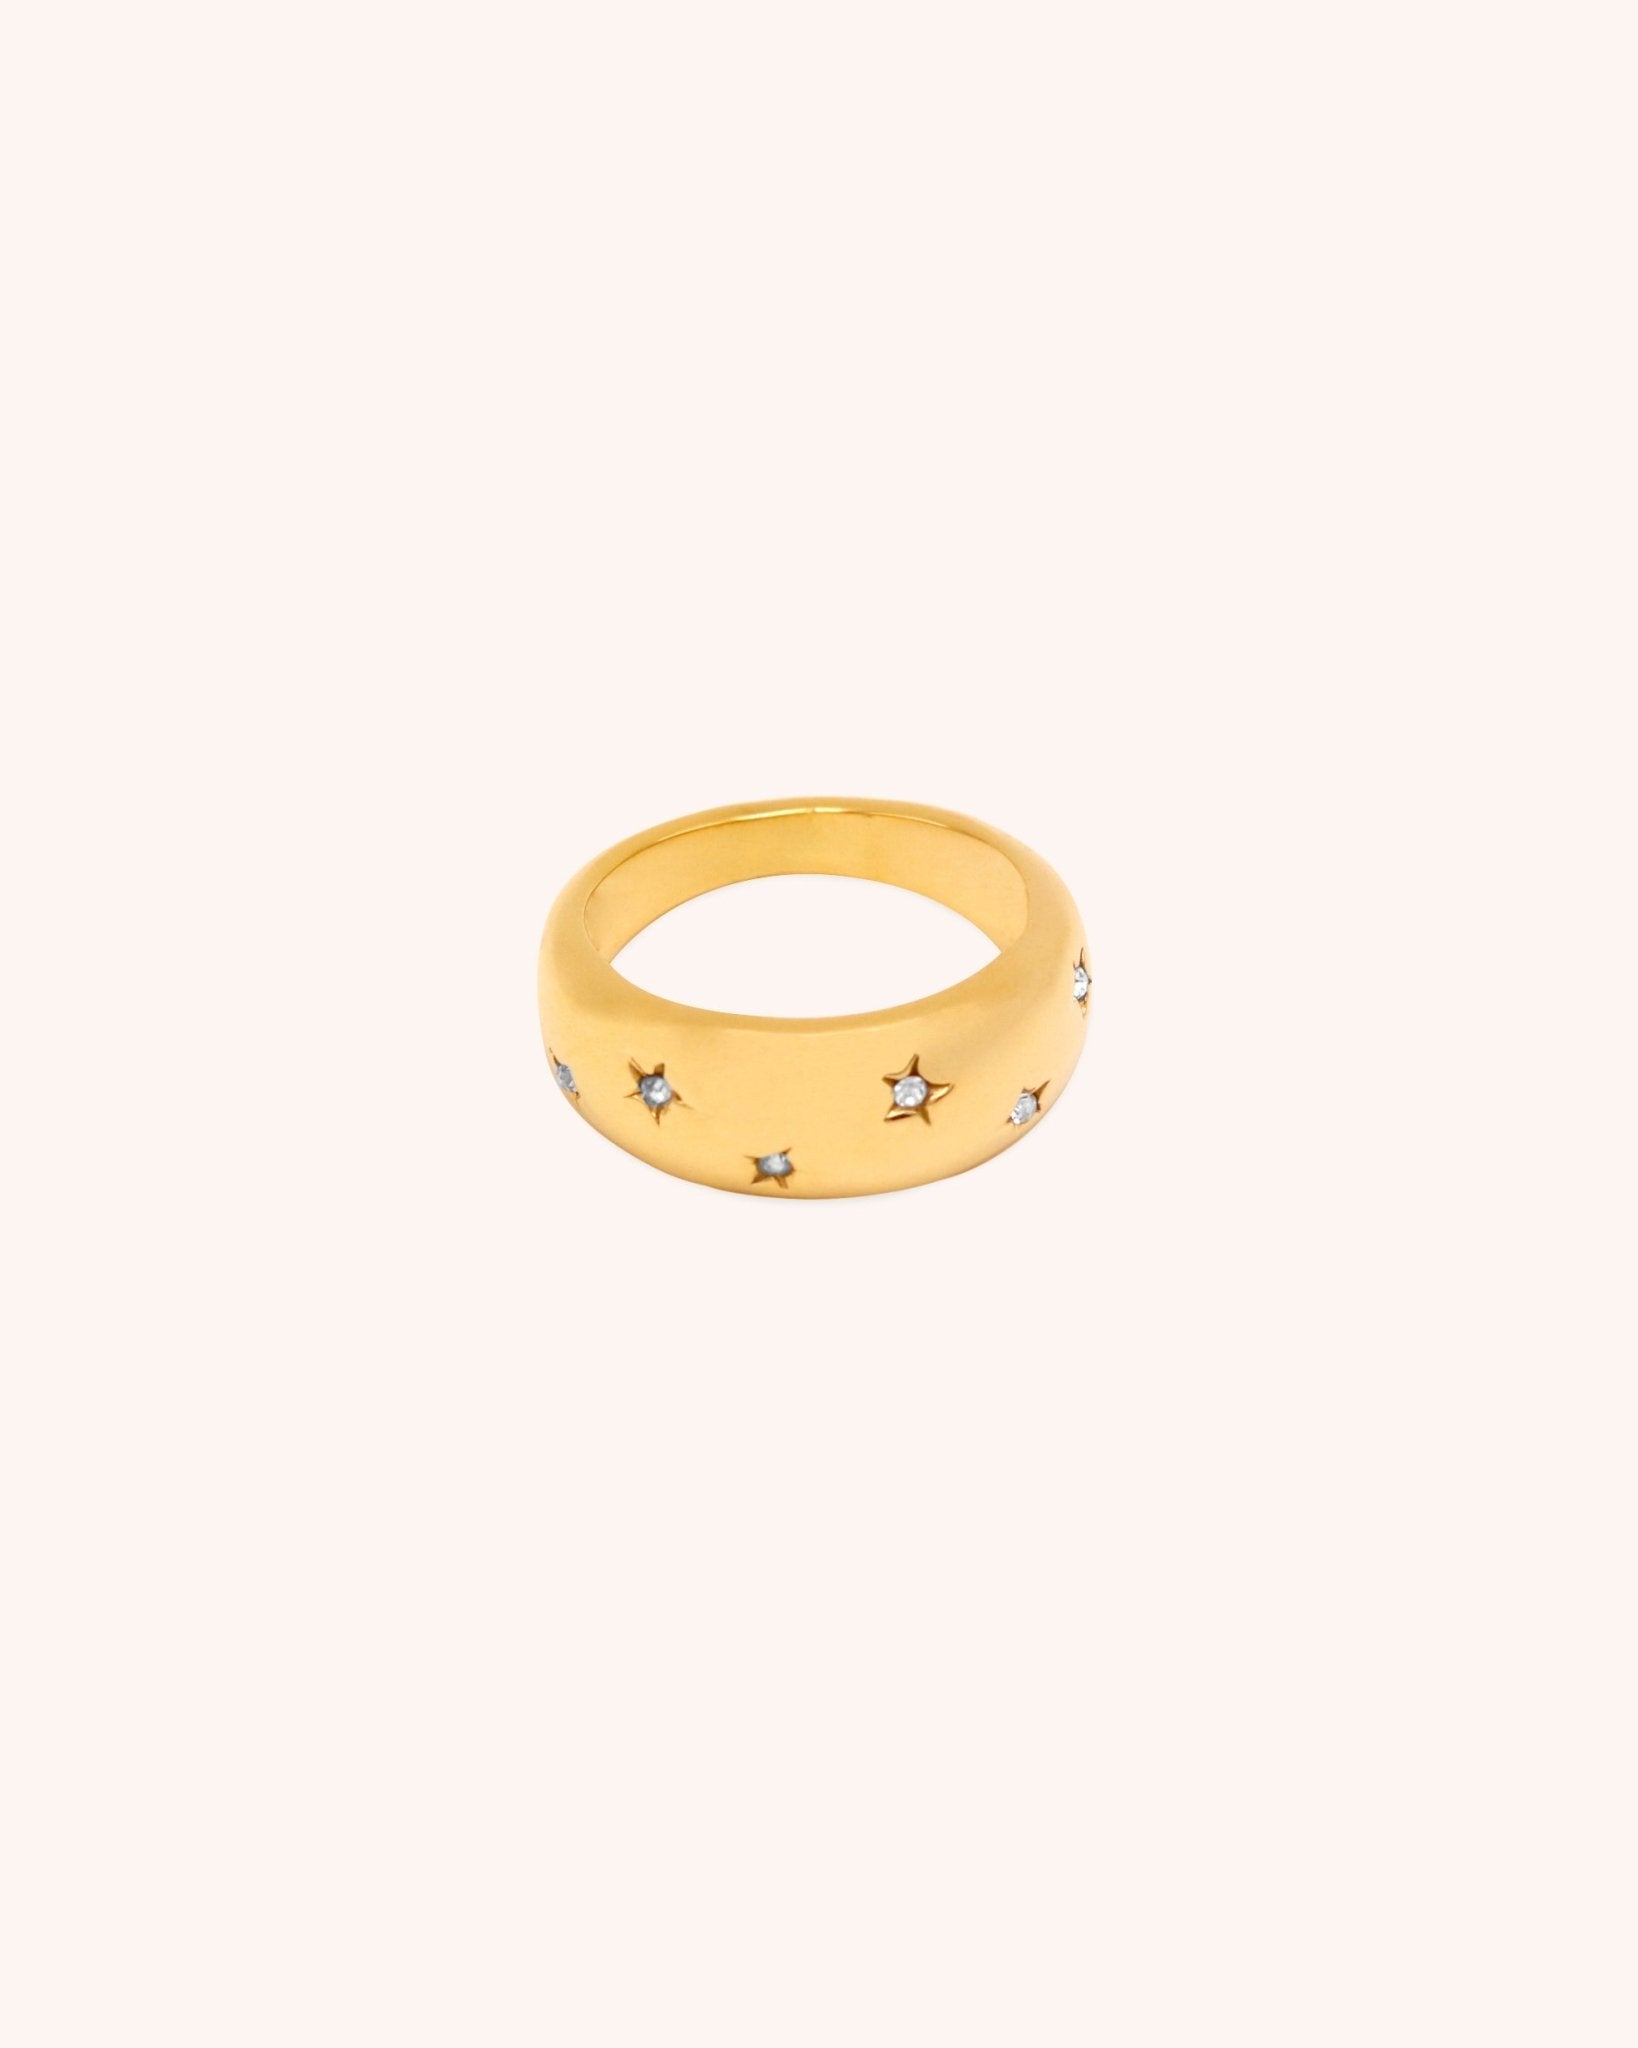 Hera Star Crystal Ring | Stainless Steel - Oia Boutique